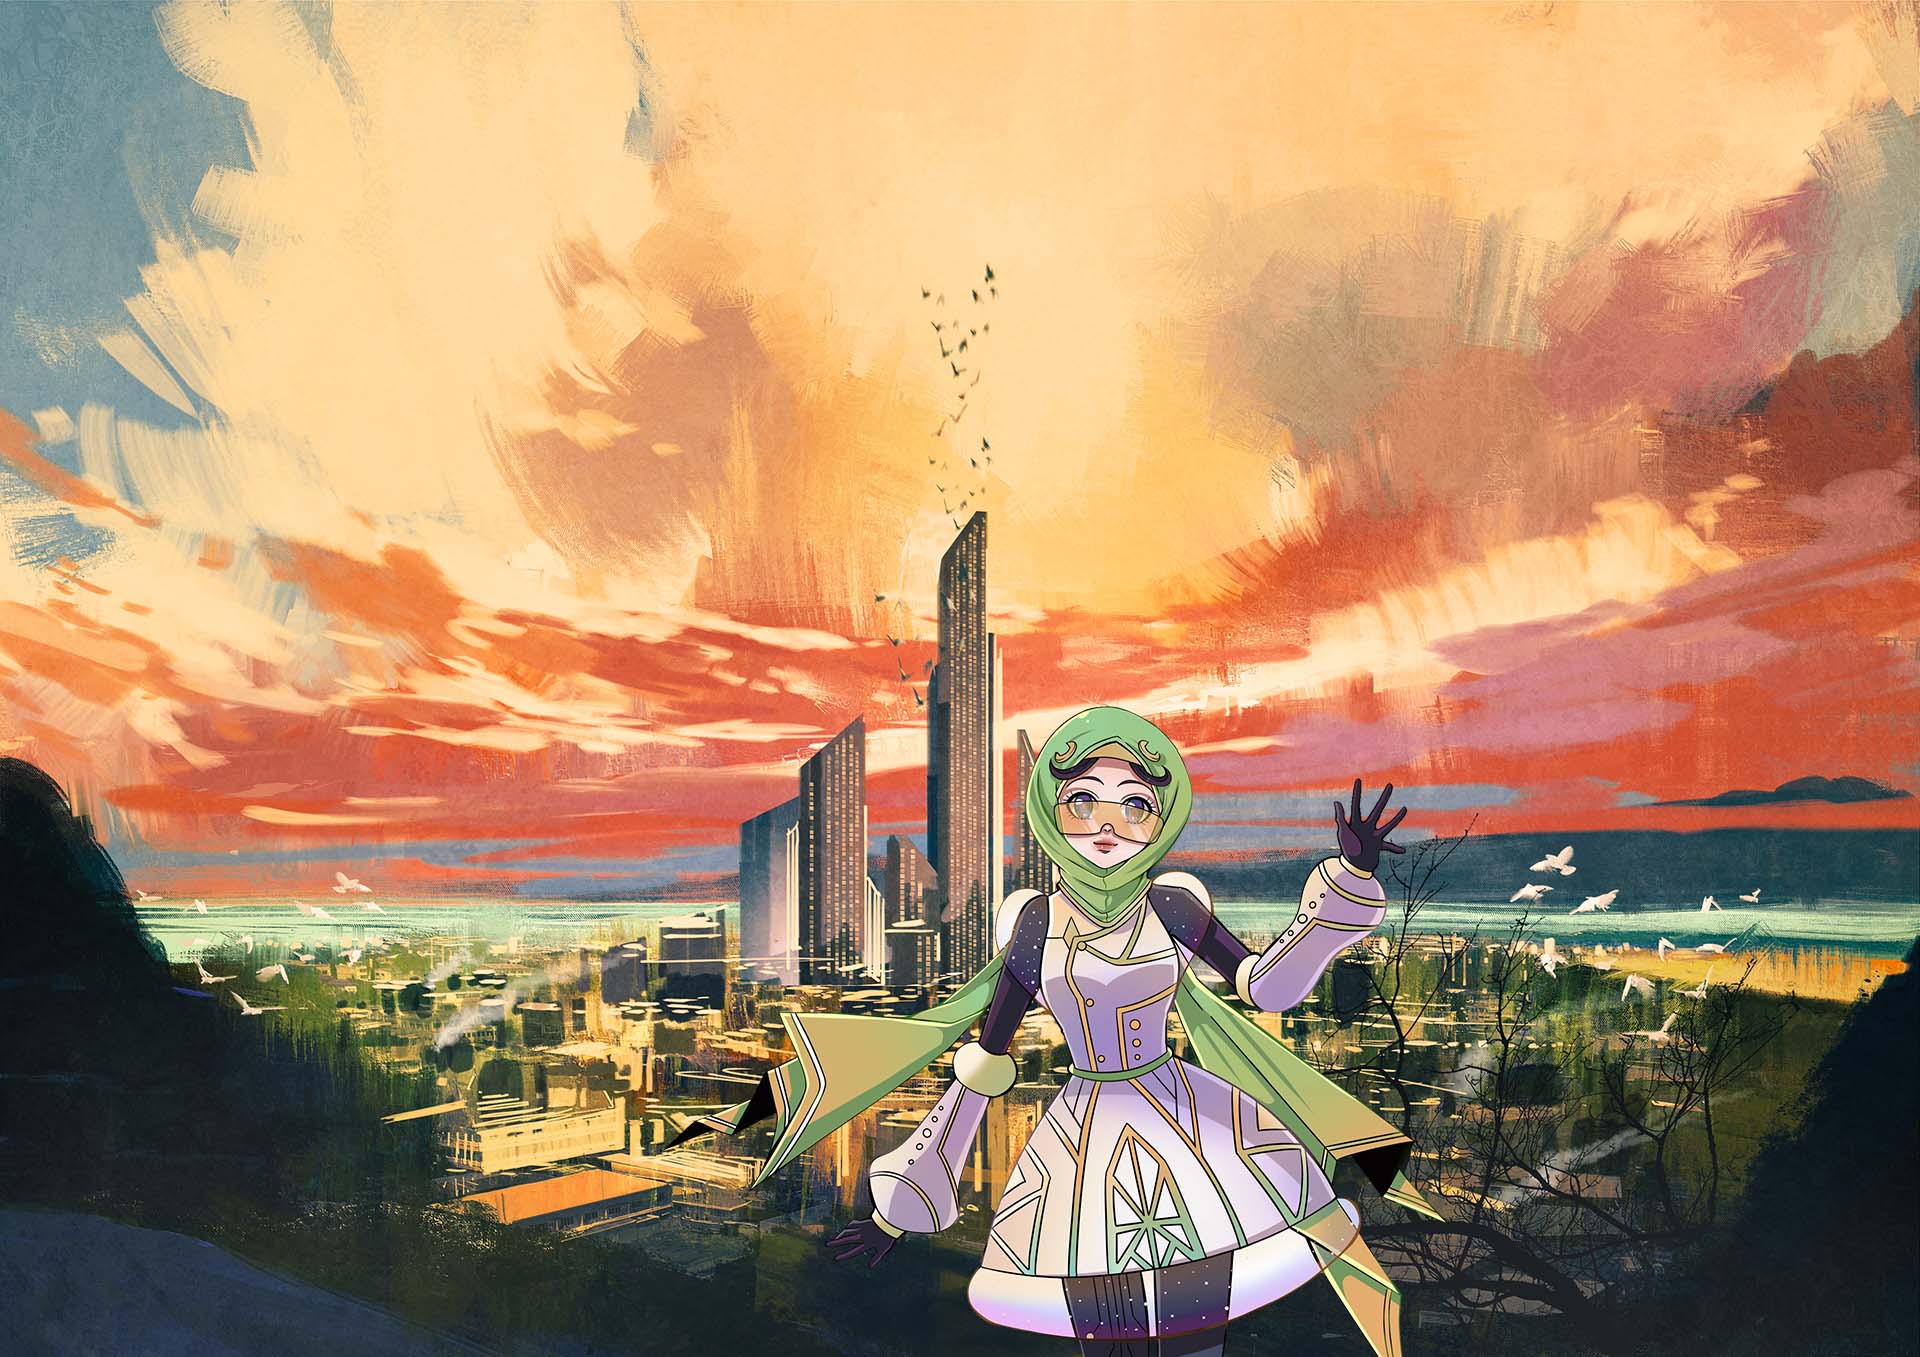 Anime-style girl wearing a hijab waving at the viewer in front of a painted-style city with an orange sky